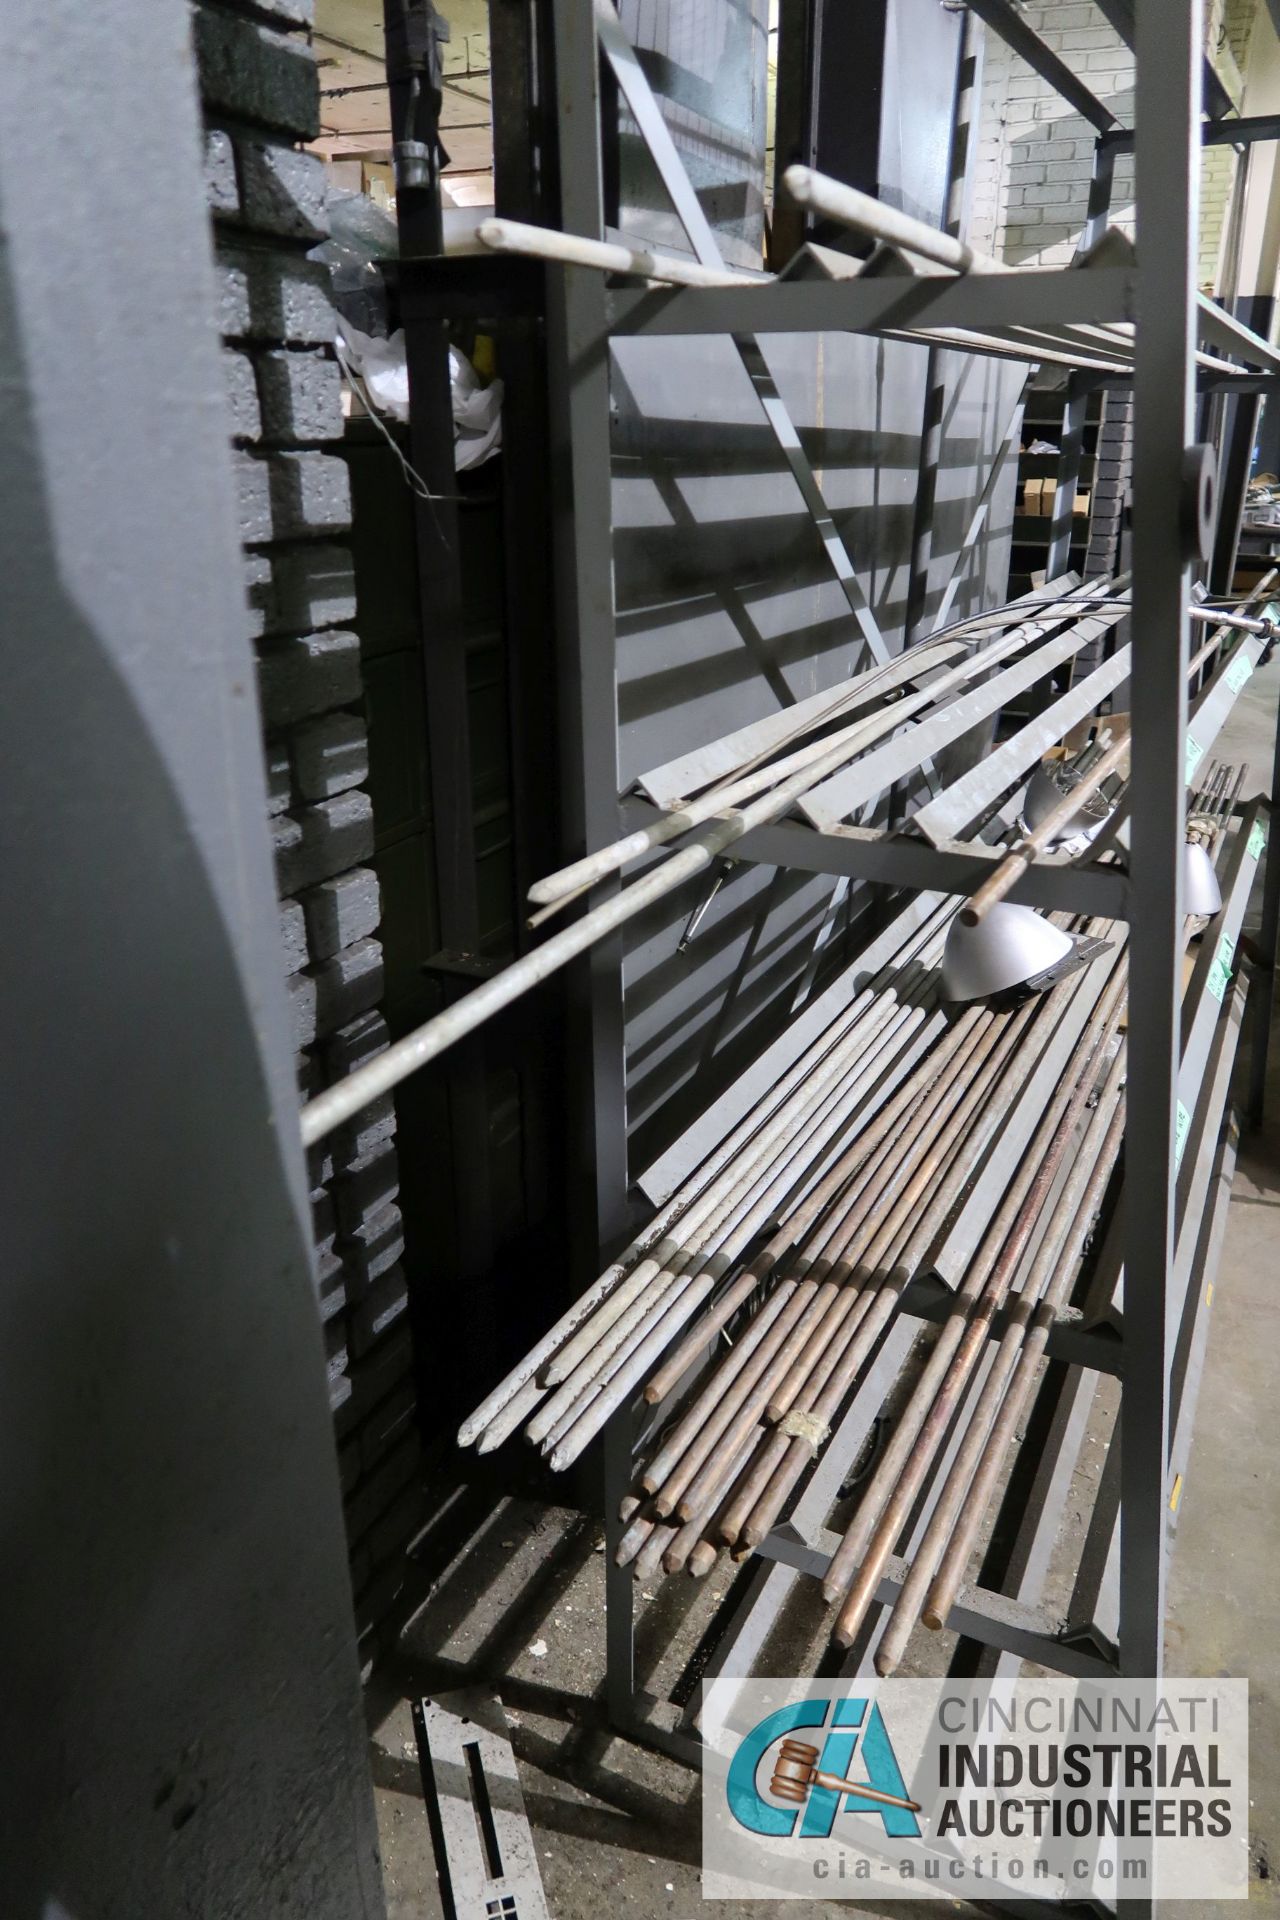 (LOT) RACK WITH COPPER COATED GROUNDING RODS (15) PIECES AT 8' LONG X 3/8" DIAMETER - Image 2 of 2